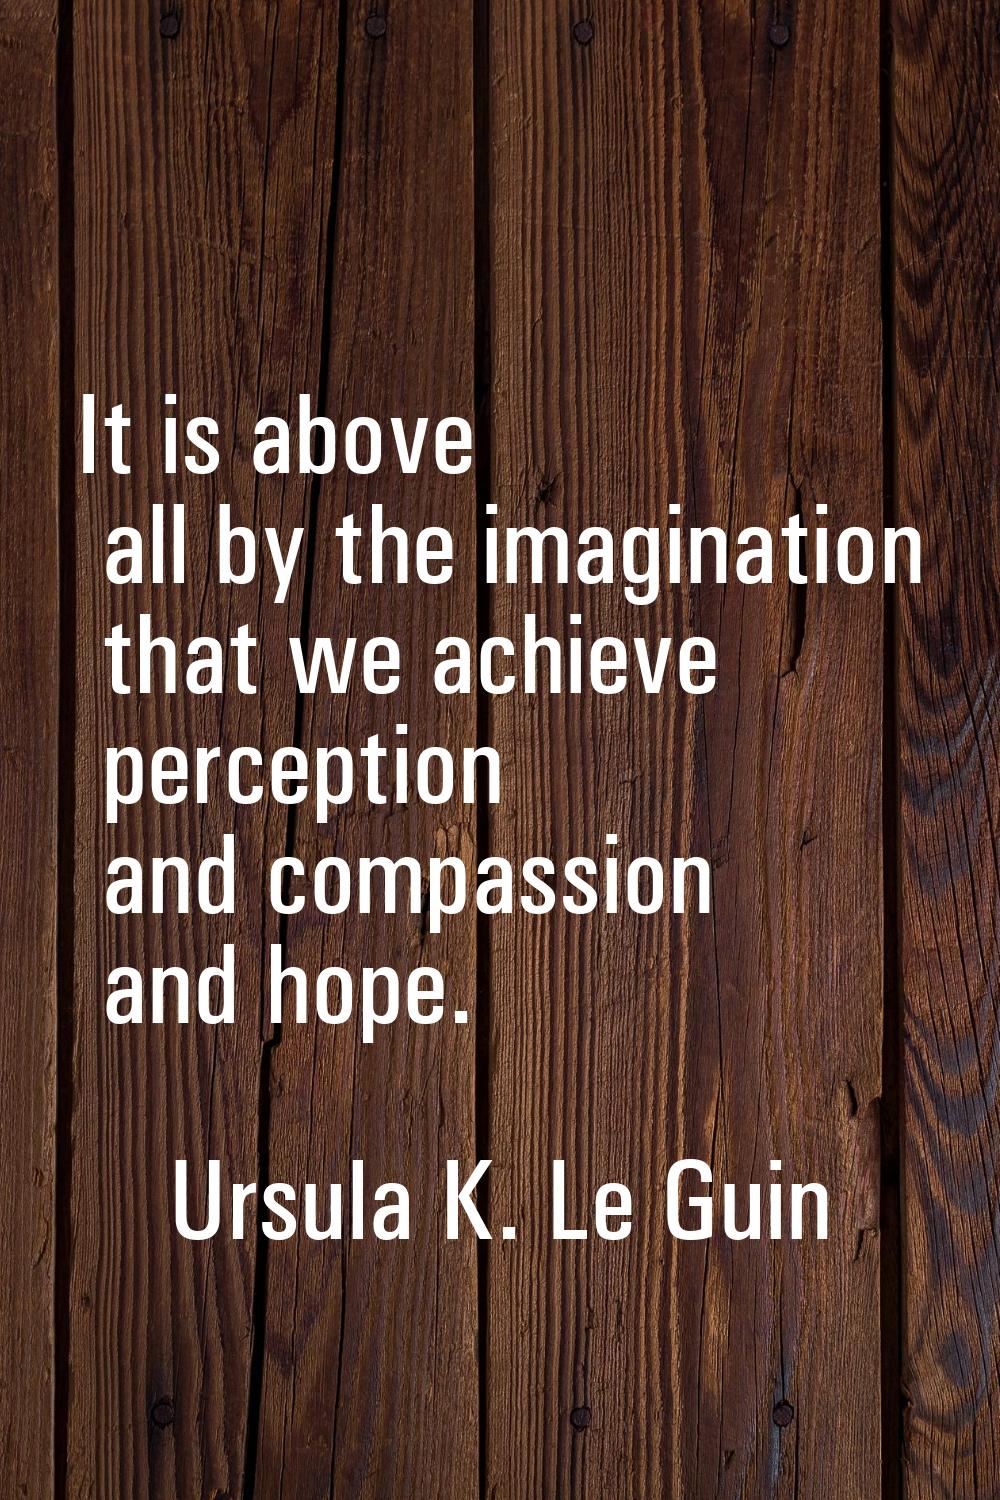 It is above all by the imagination that we achieve perception and compassion and hope.